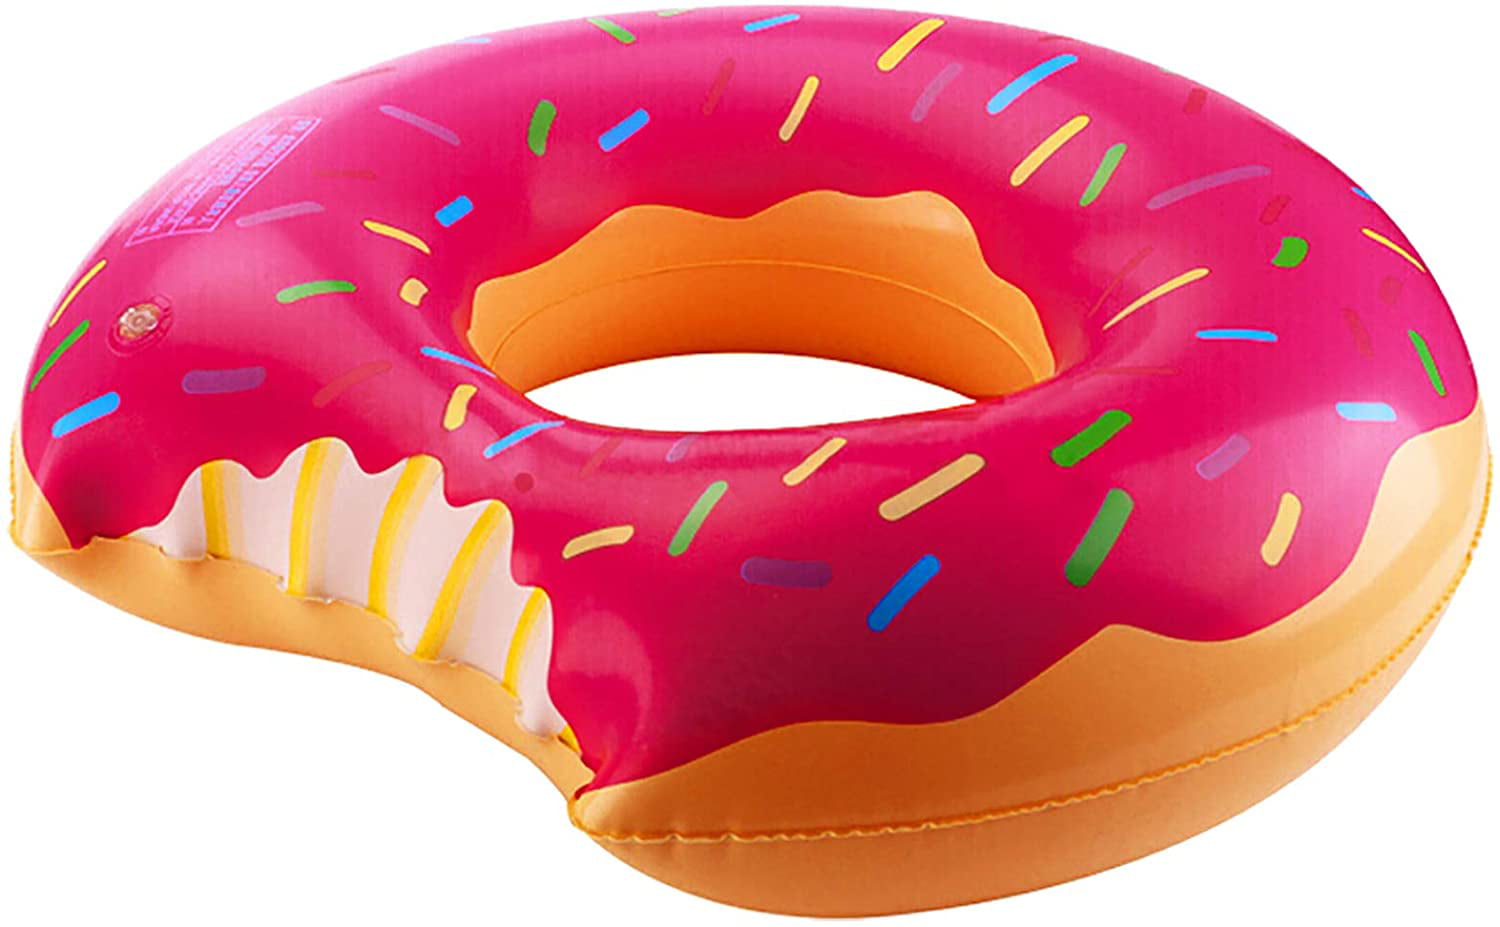 Chocolate Strawberry Donut Swim Ring FLOTADOR for Kids and Adults Yarssir Giant Donut Pool Float Funny Inflatable Vinyl Summer Pool Beach Toy Chocolate #80